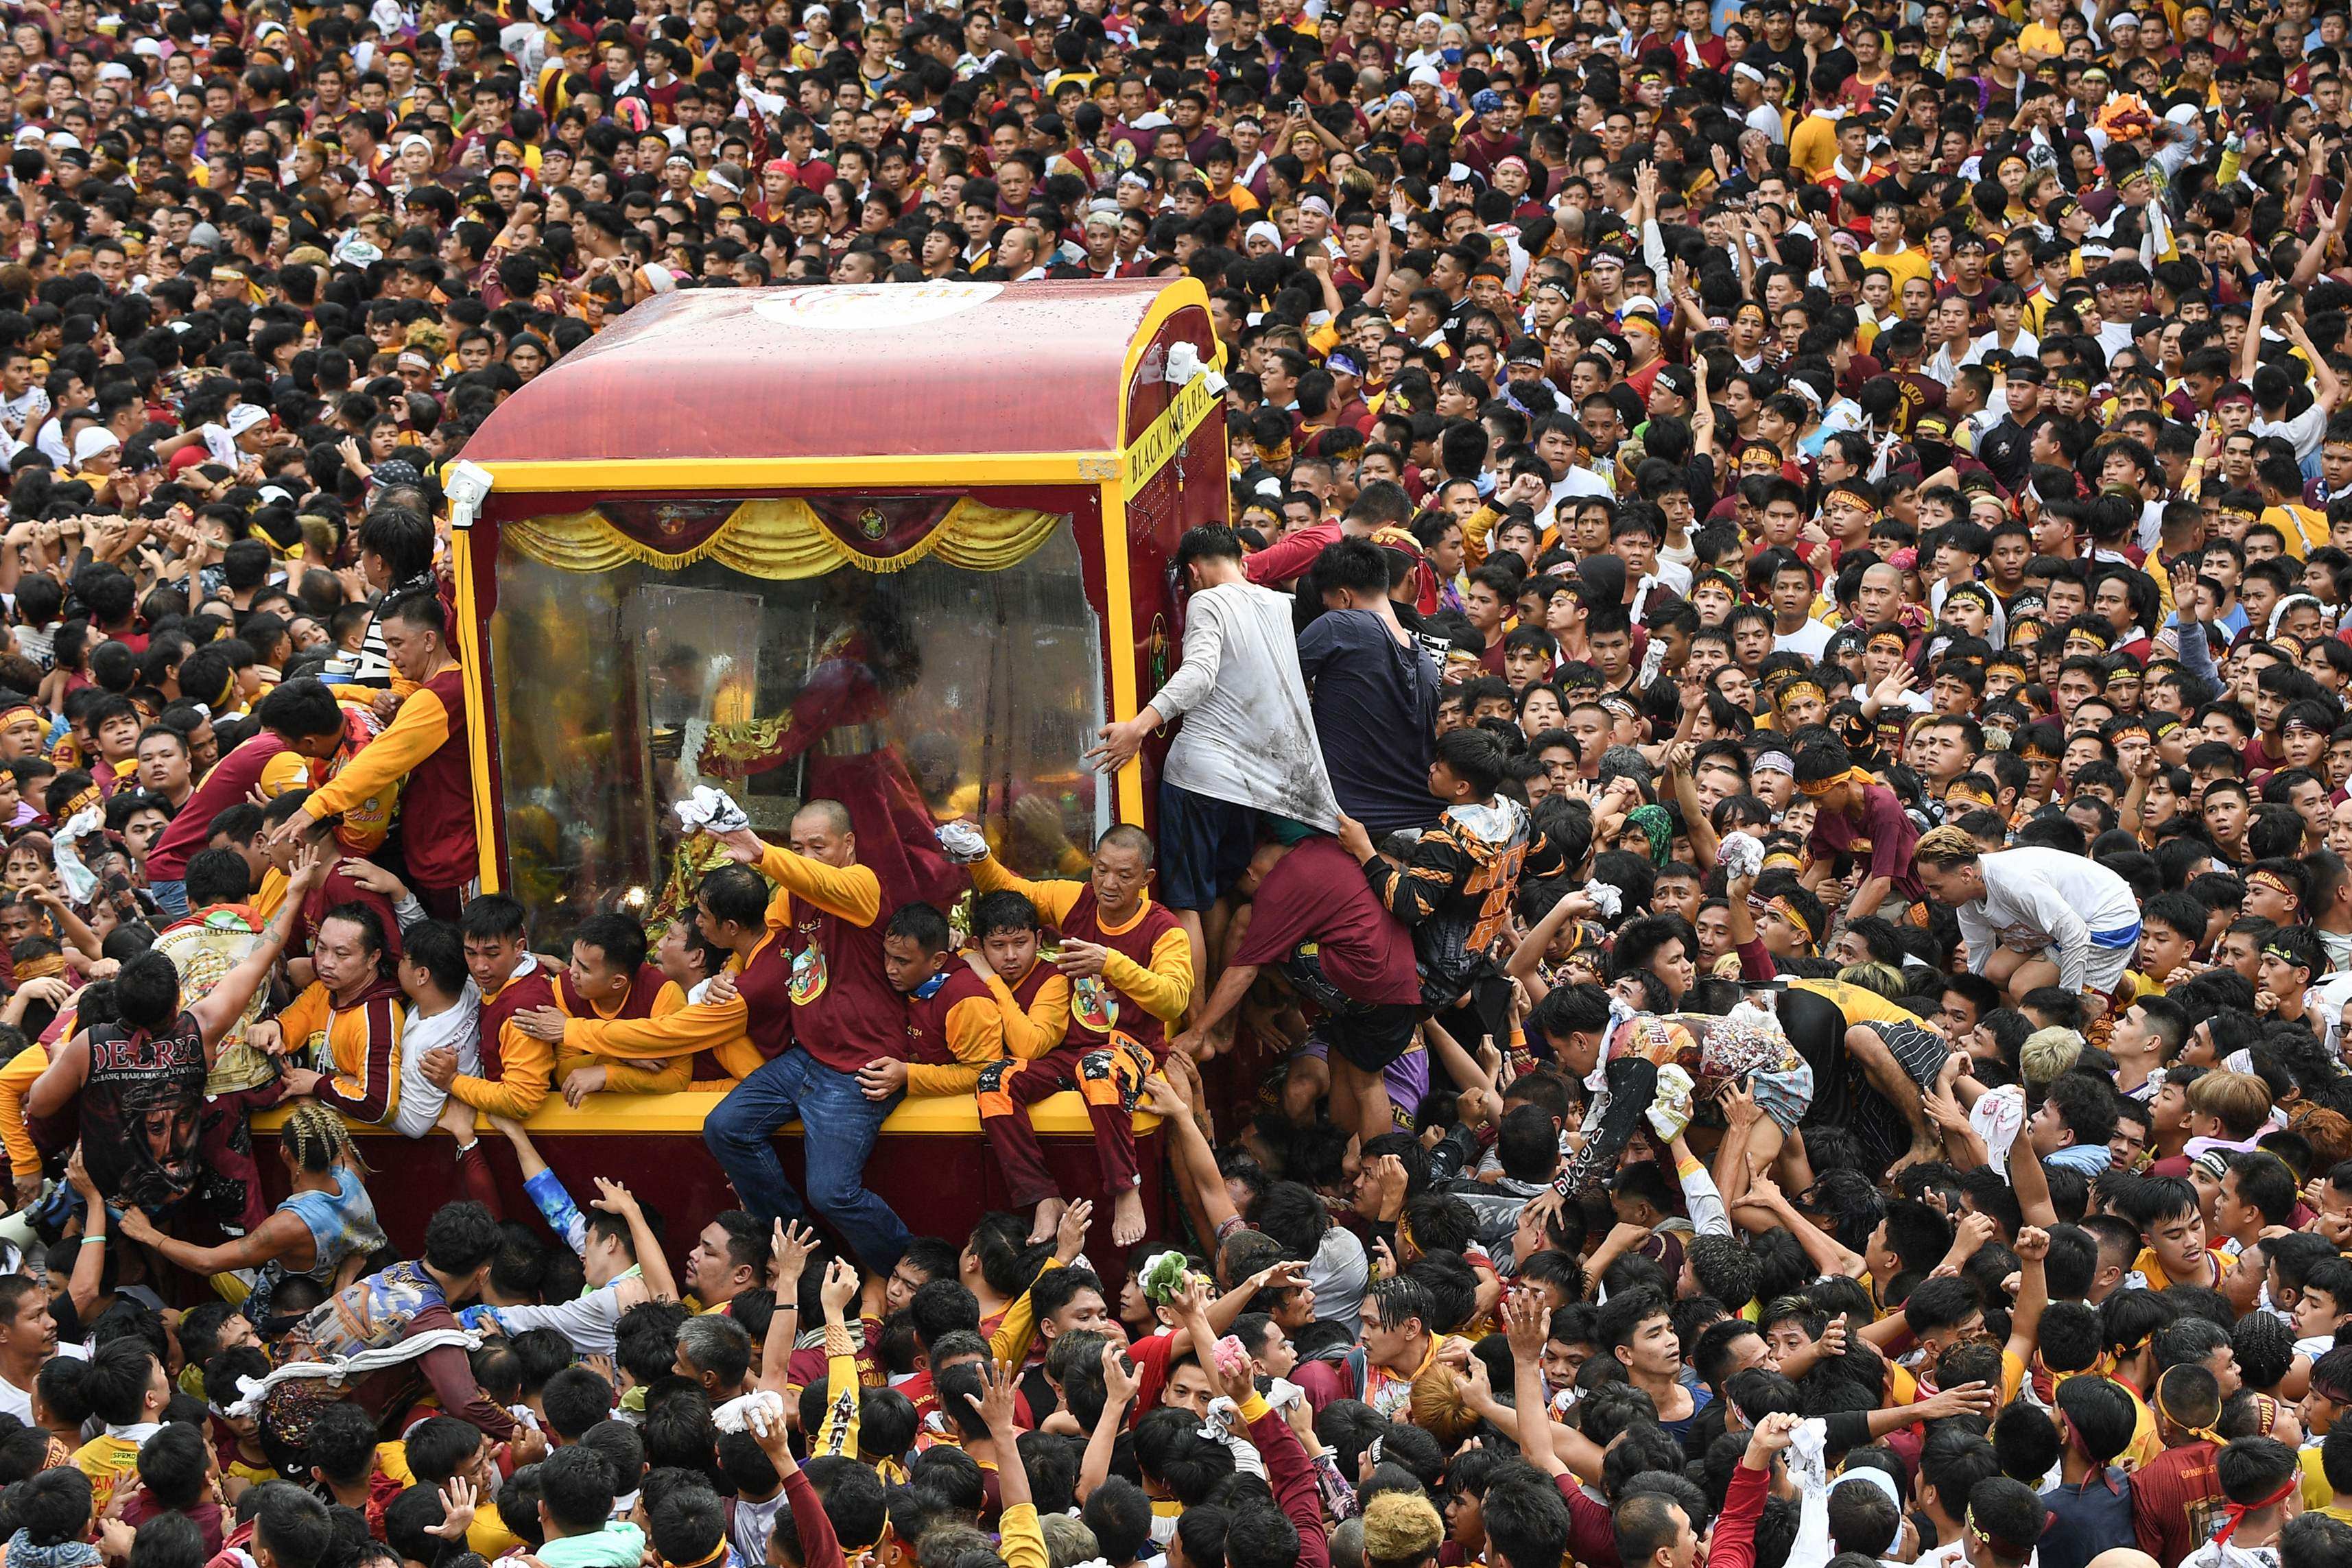 Catholic devotees climb  onto a glass-covered carriage carrying the so-called Black Nazarene statue as they try to touch it during a religious procession in Manila on Tuesday. Photo: AFP